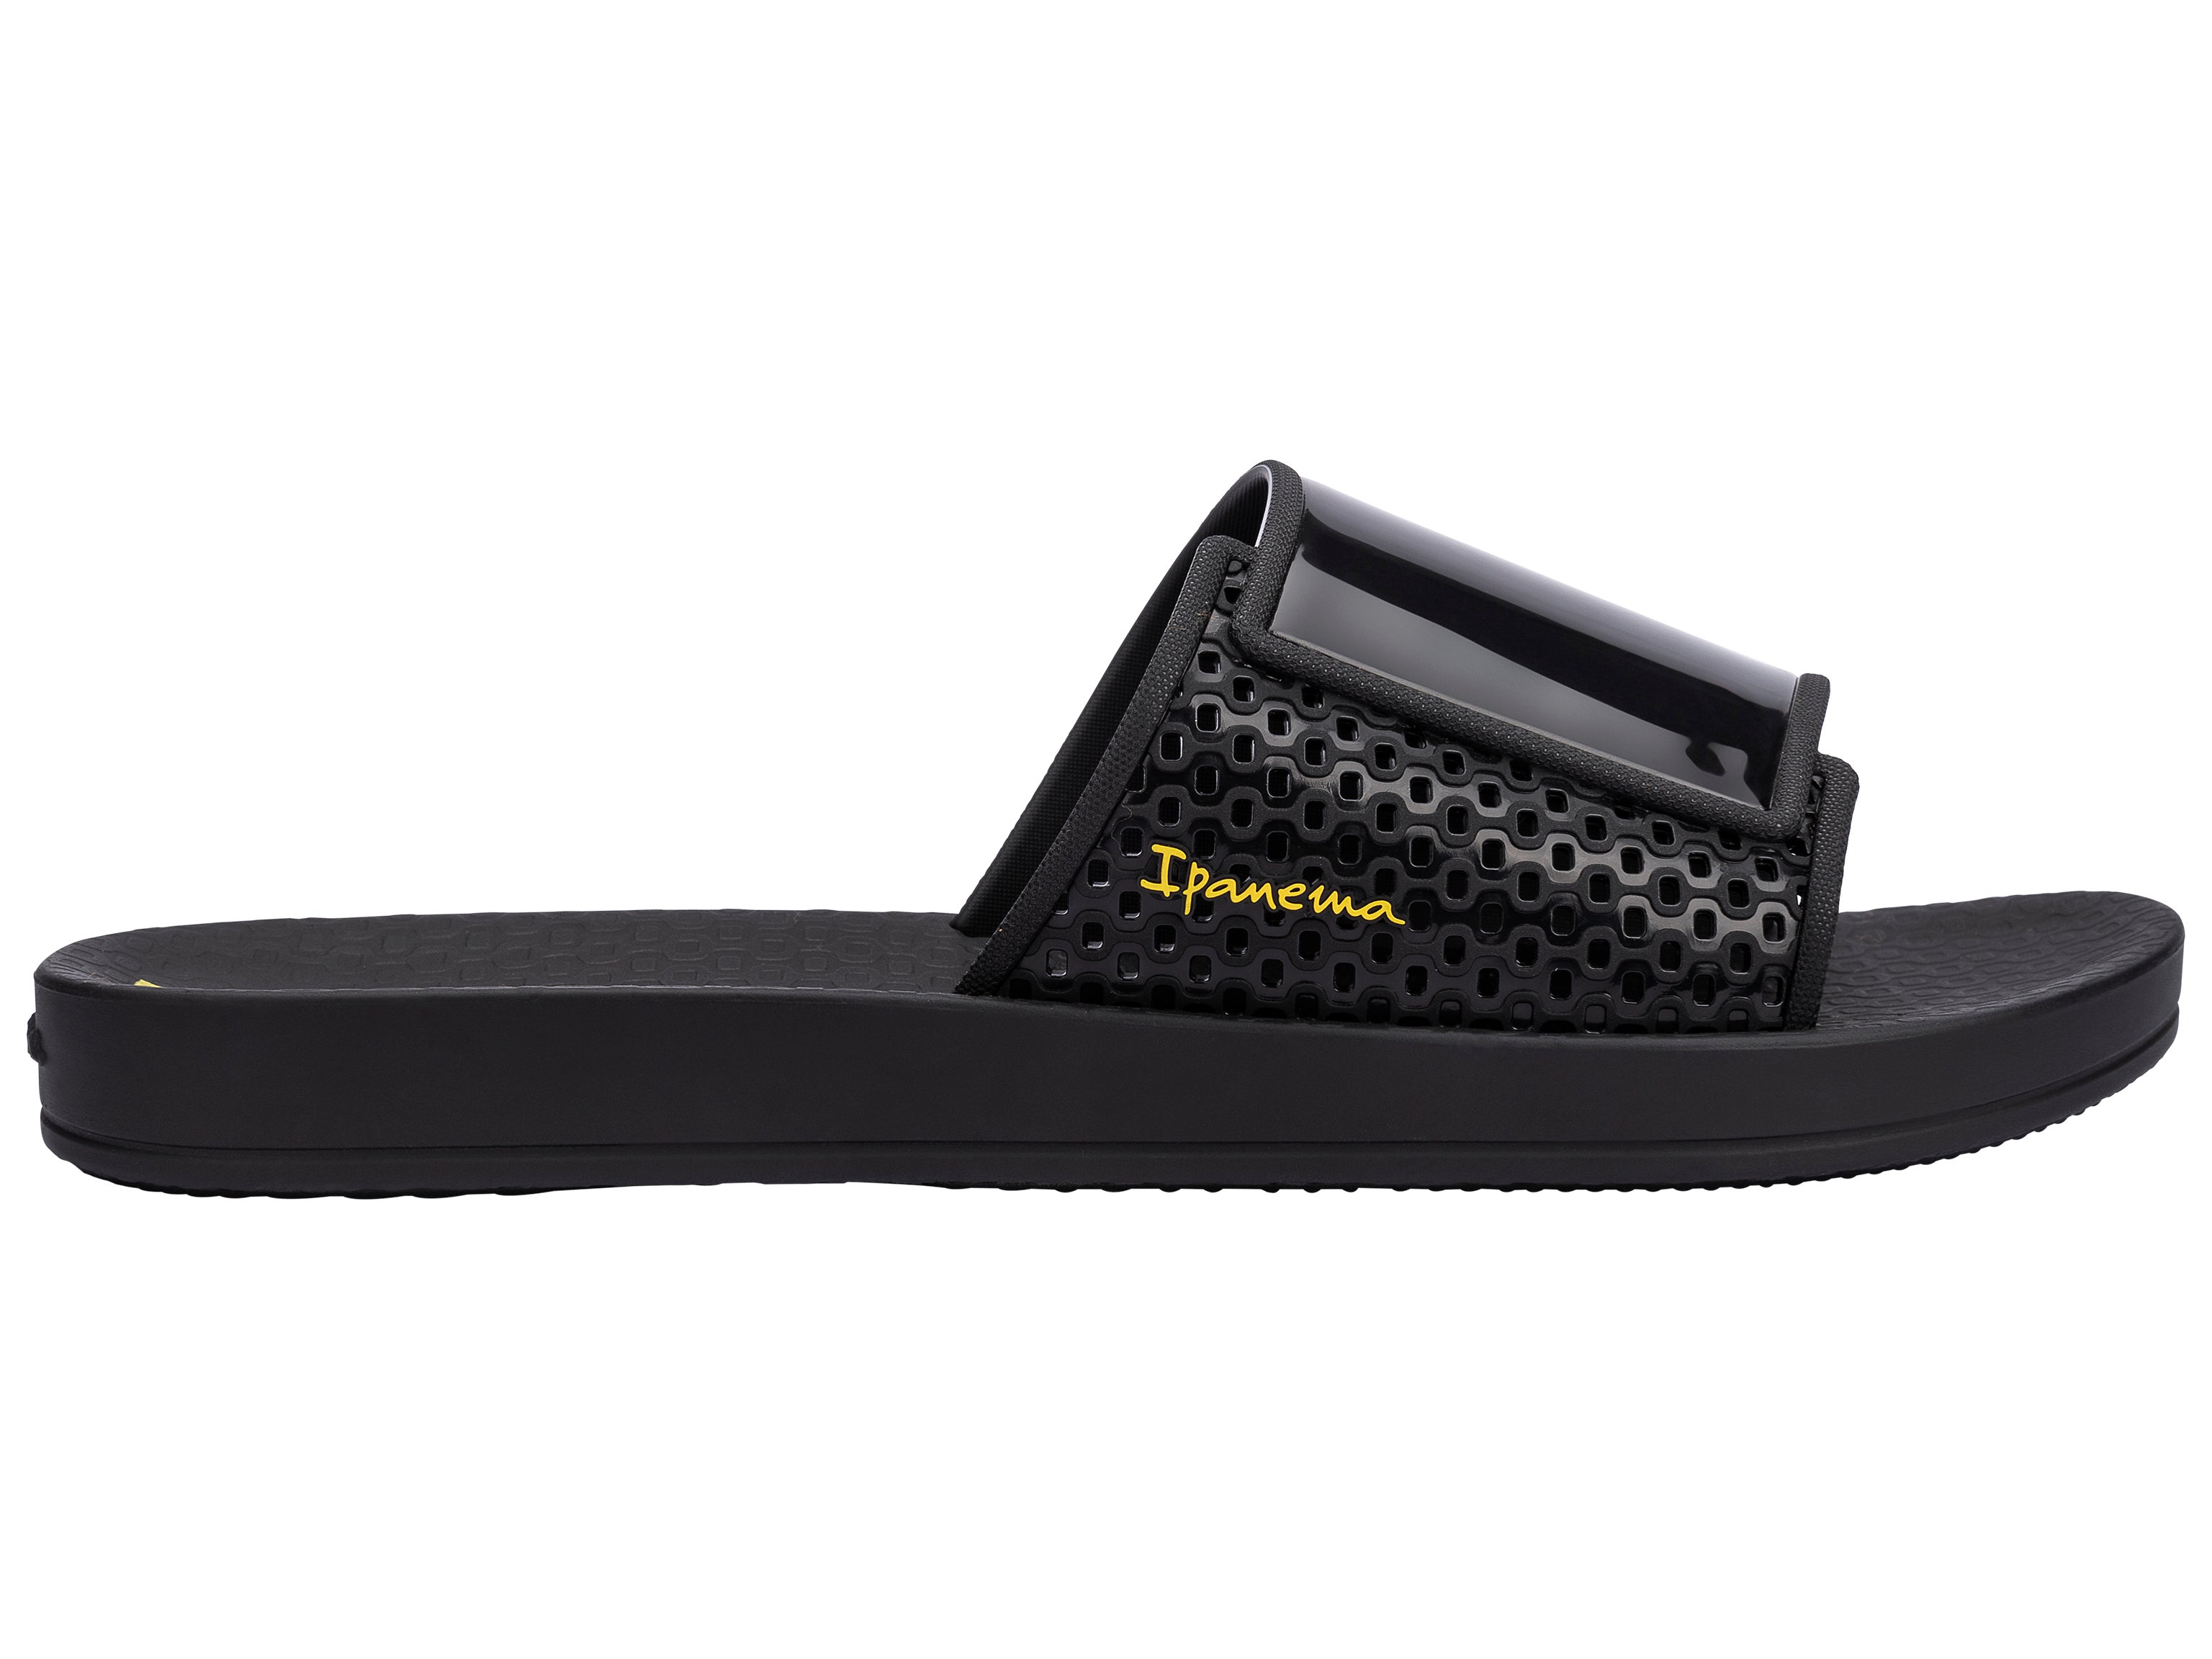 Outer side view of a black Ipanema Ana Urban women's slide.